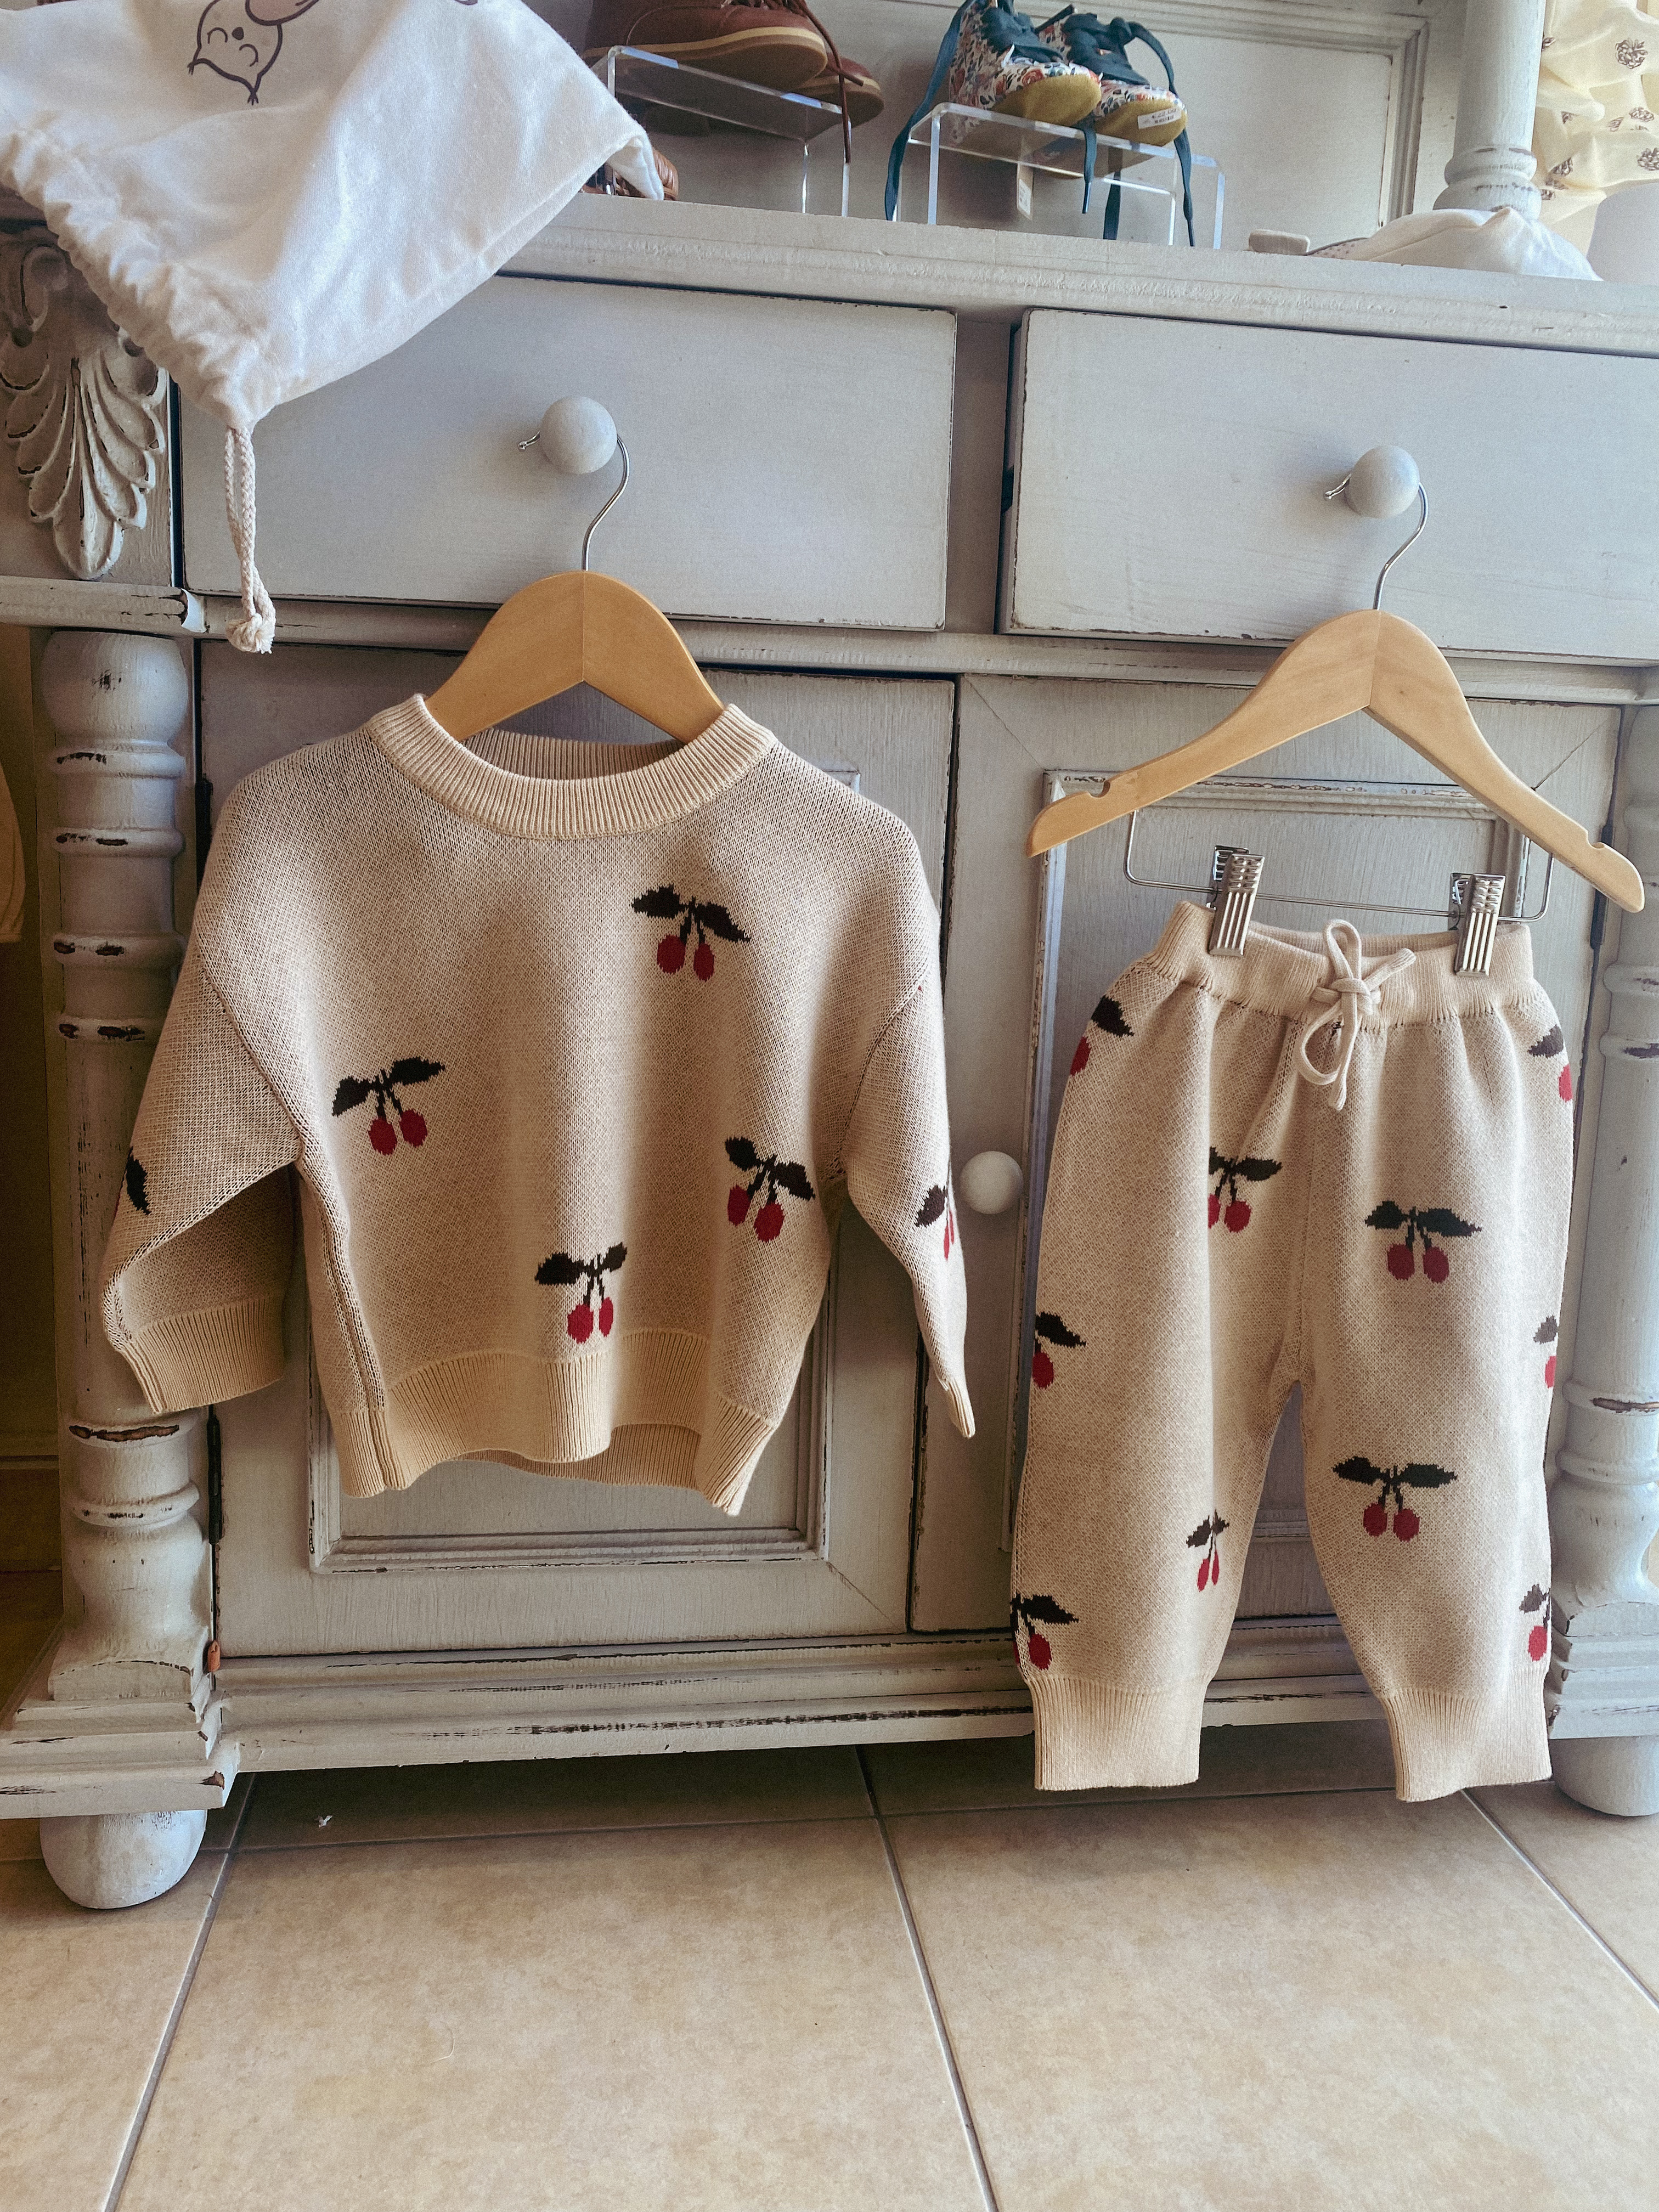 creamy white cotton jacquard knitted toddler sweatshirt and matching bottoms set is hanging from a vintage piece of furniture. the pants are hanging next to the top and the image shows how the clothes are cut and the style they have also the pattern which is red and brown cherries.